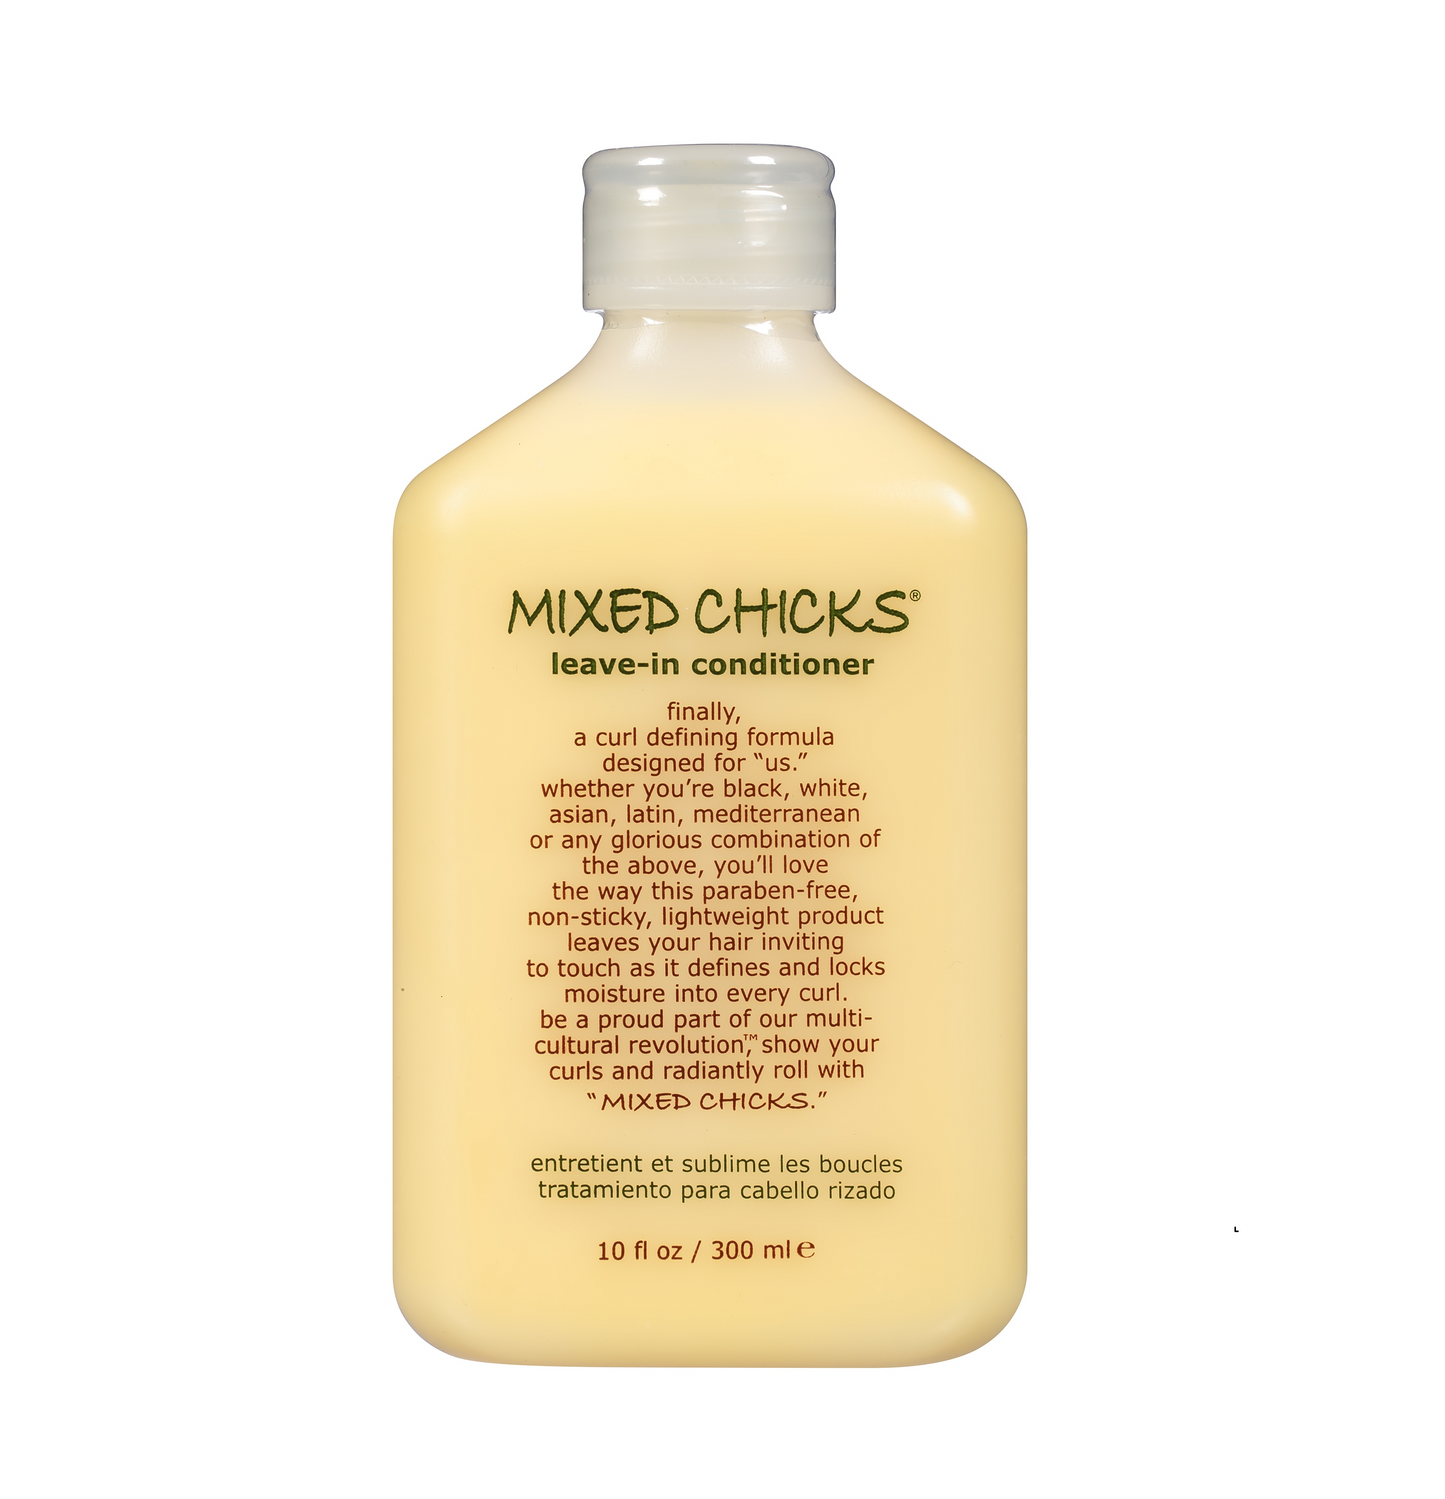 MIXED CHICKS LV-IN CONDITIONER 10OZ